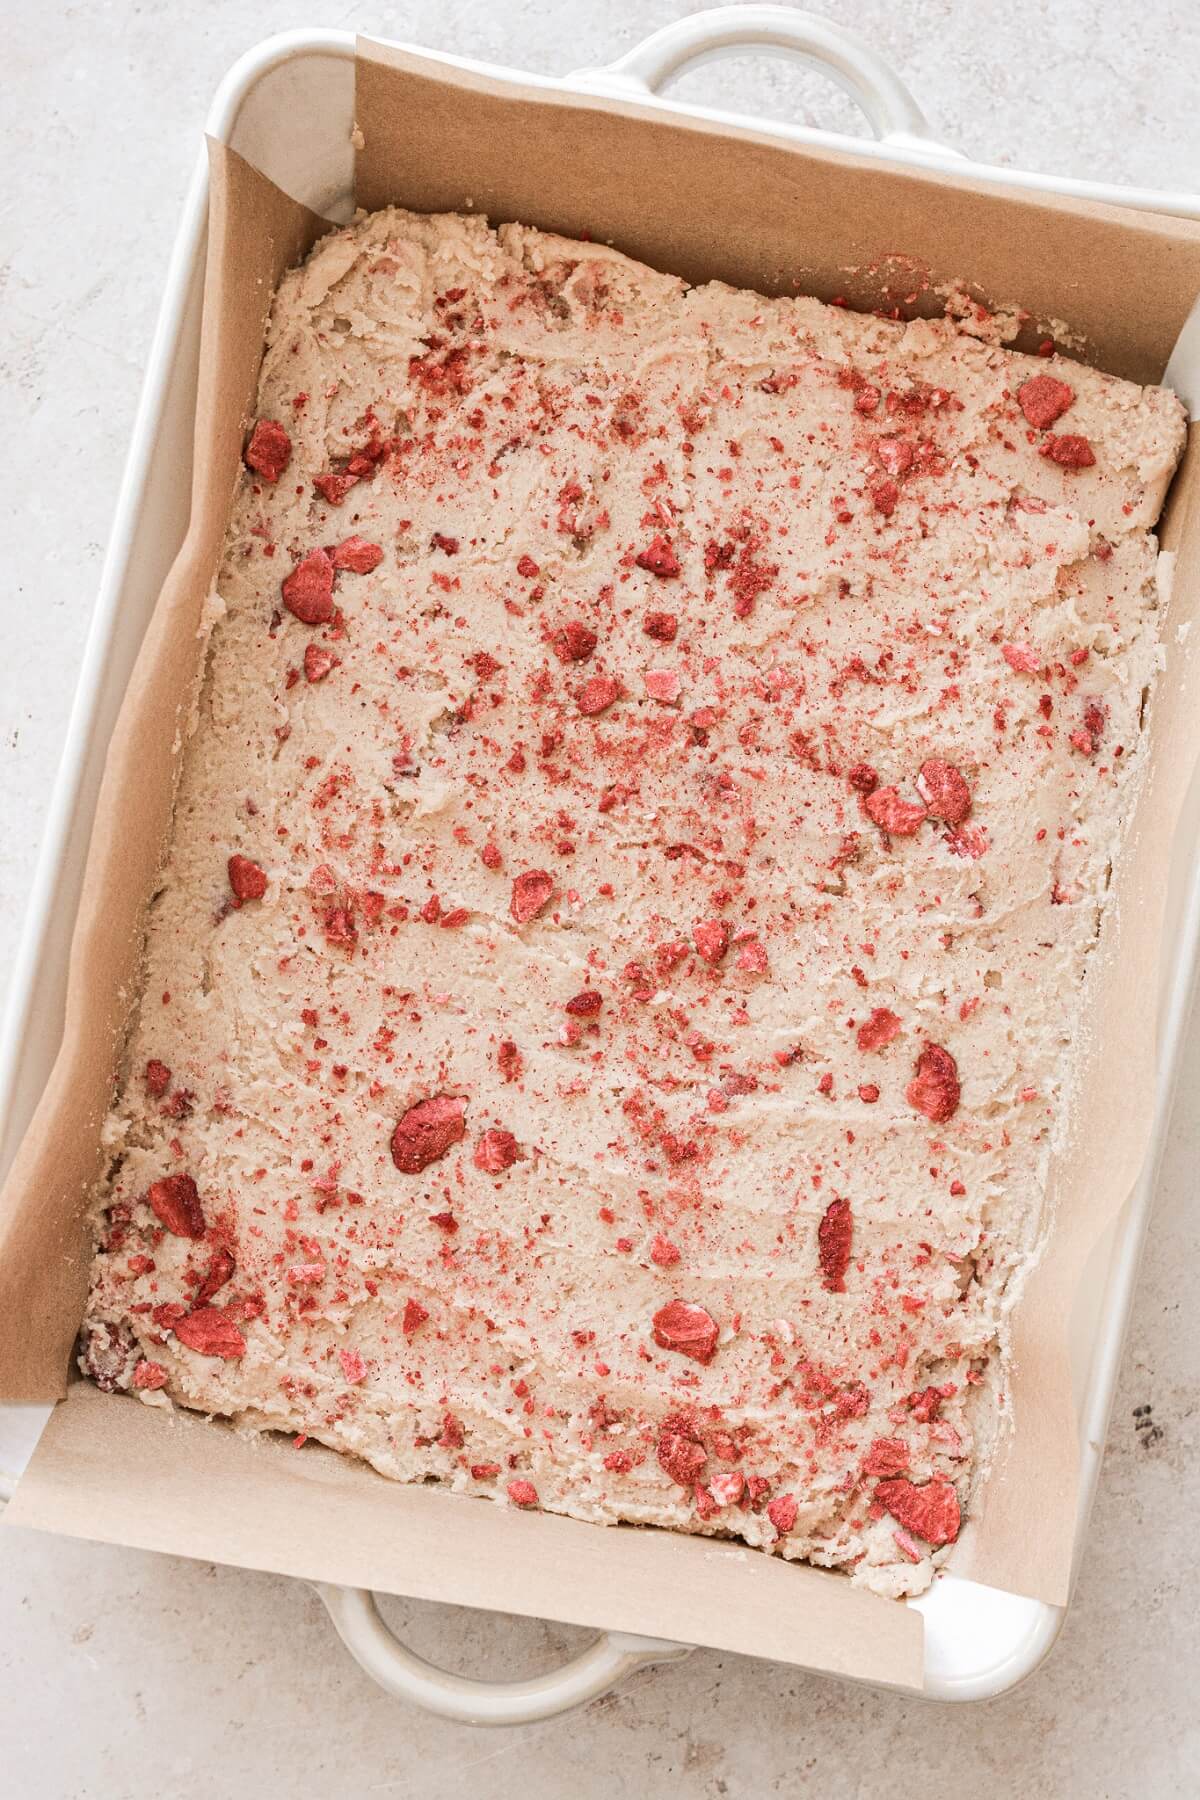 Strawberry cookie bar dough ready to be baked.